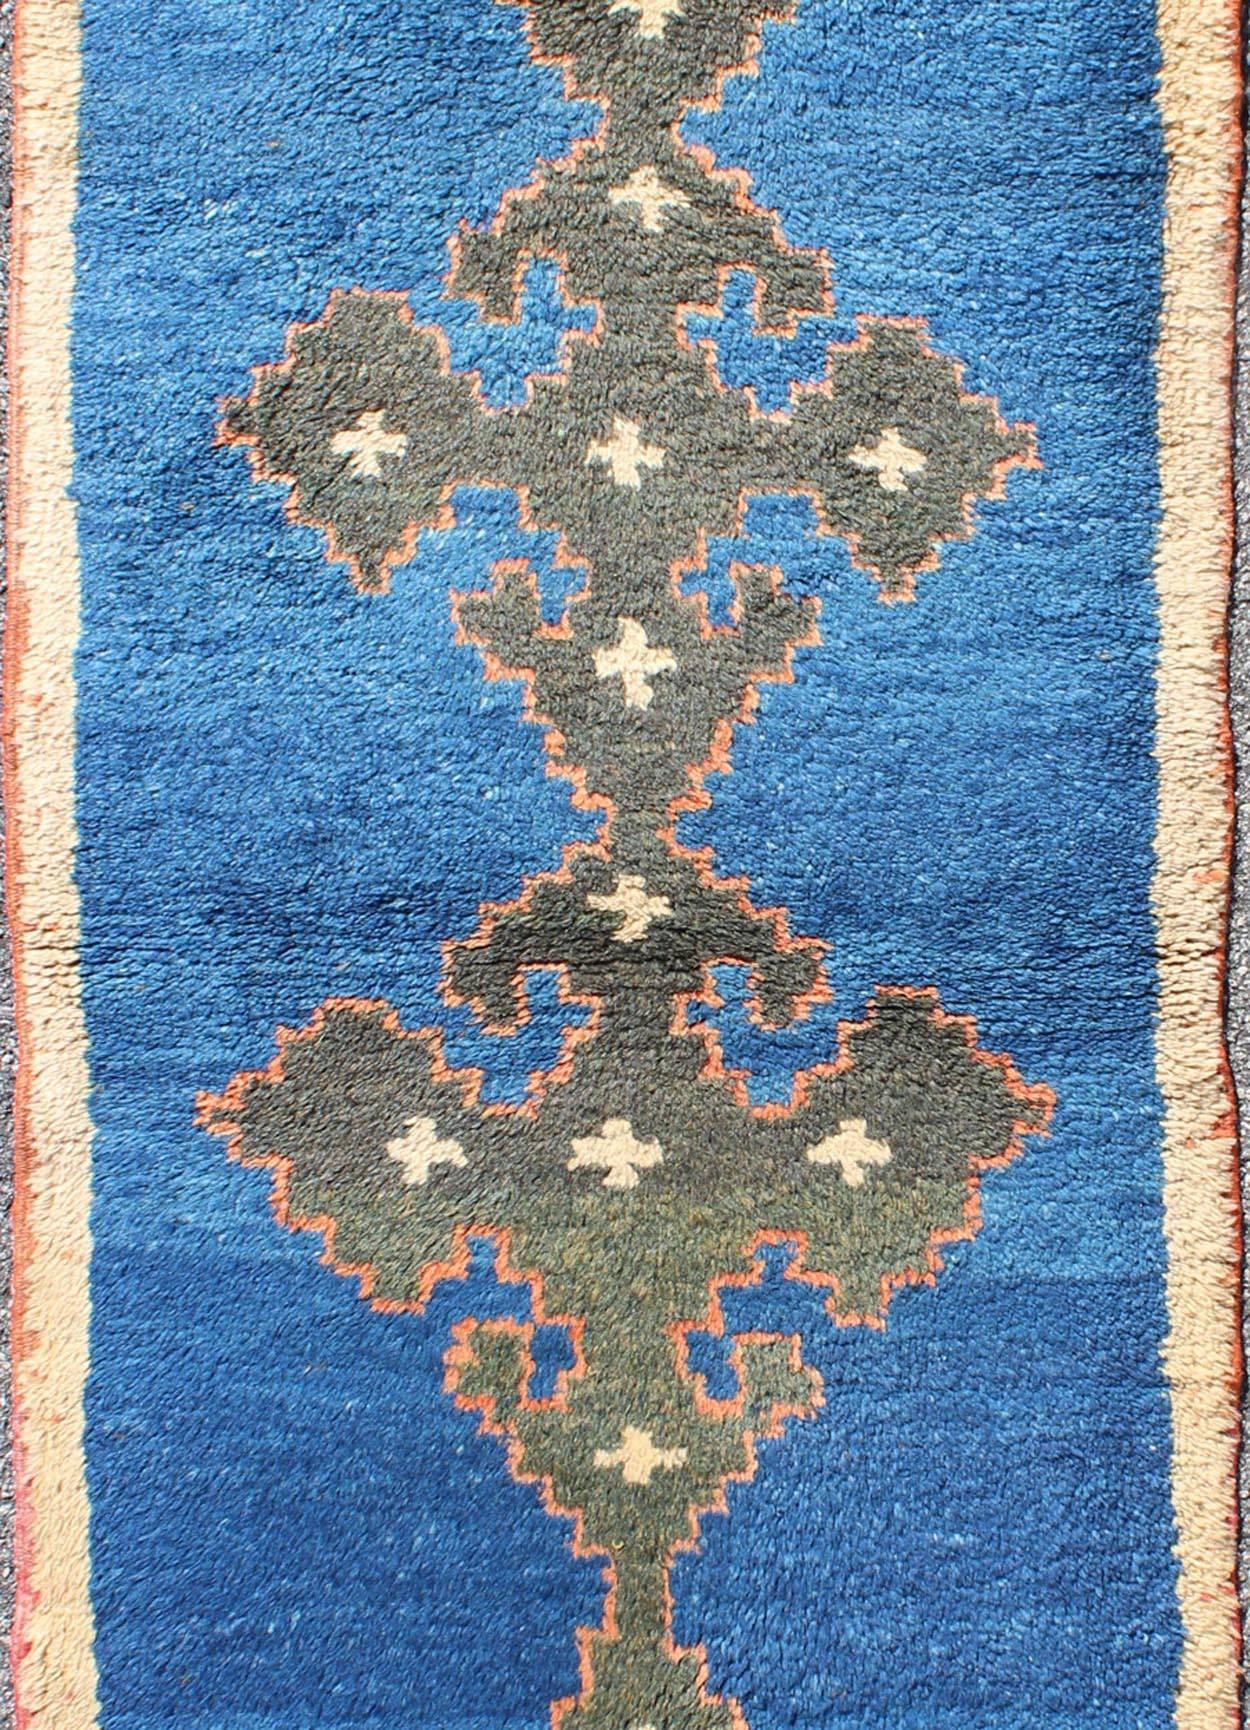 Hand-Knotted Turkish Vintage Tulu Runner with Cross-Shaped Medallions in Orange, Green & Blue